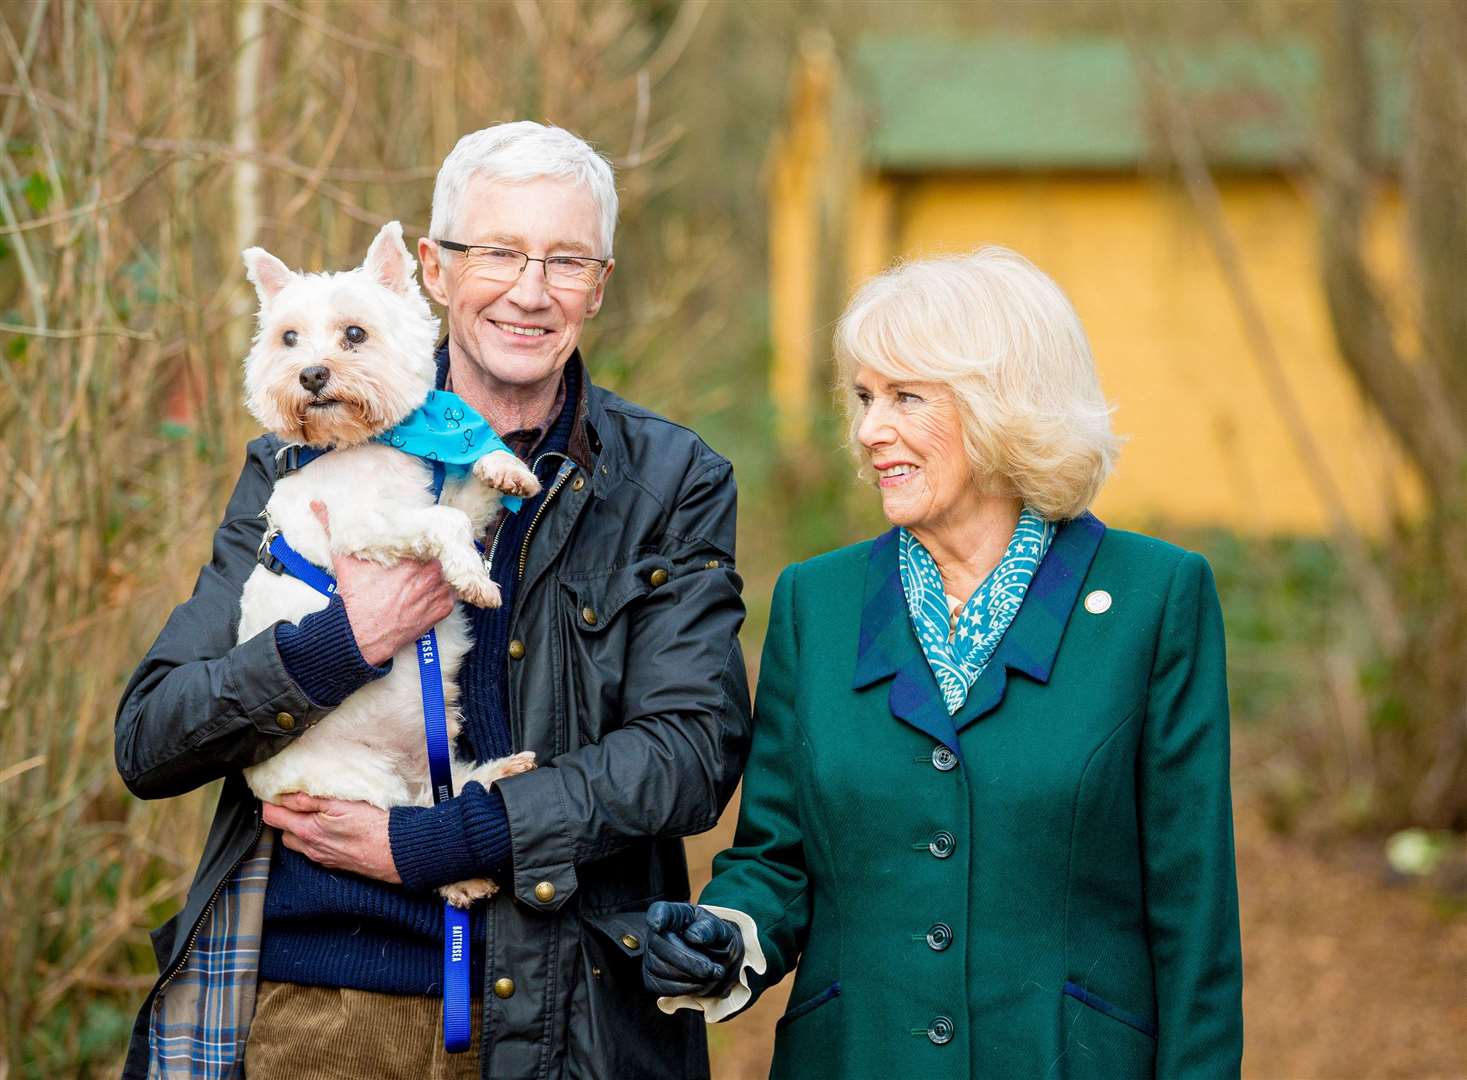 Paul O'Grady and Queen Camilla in a special episode of For the Love of Dogs